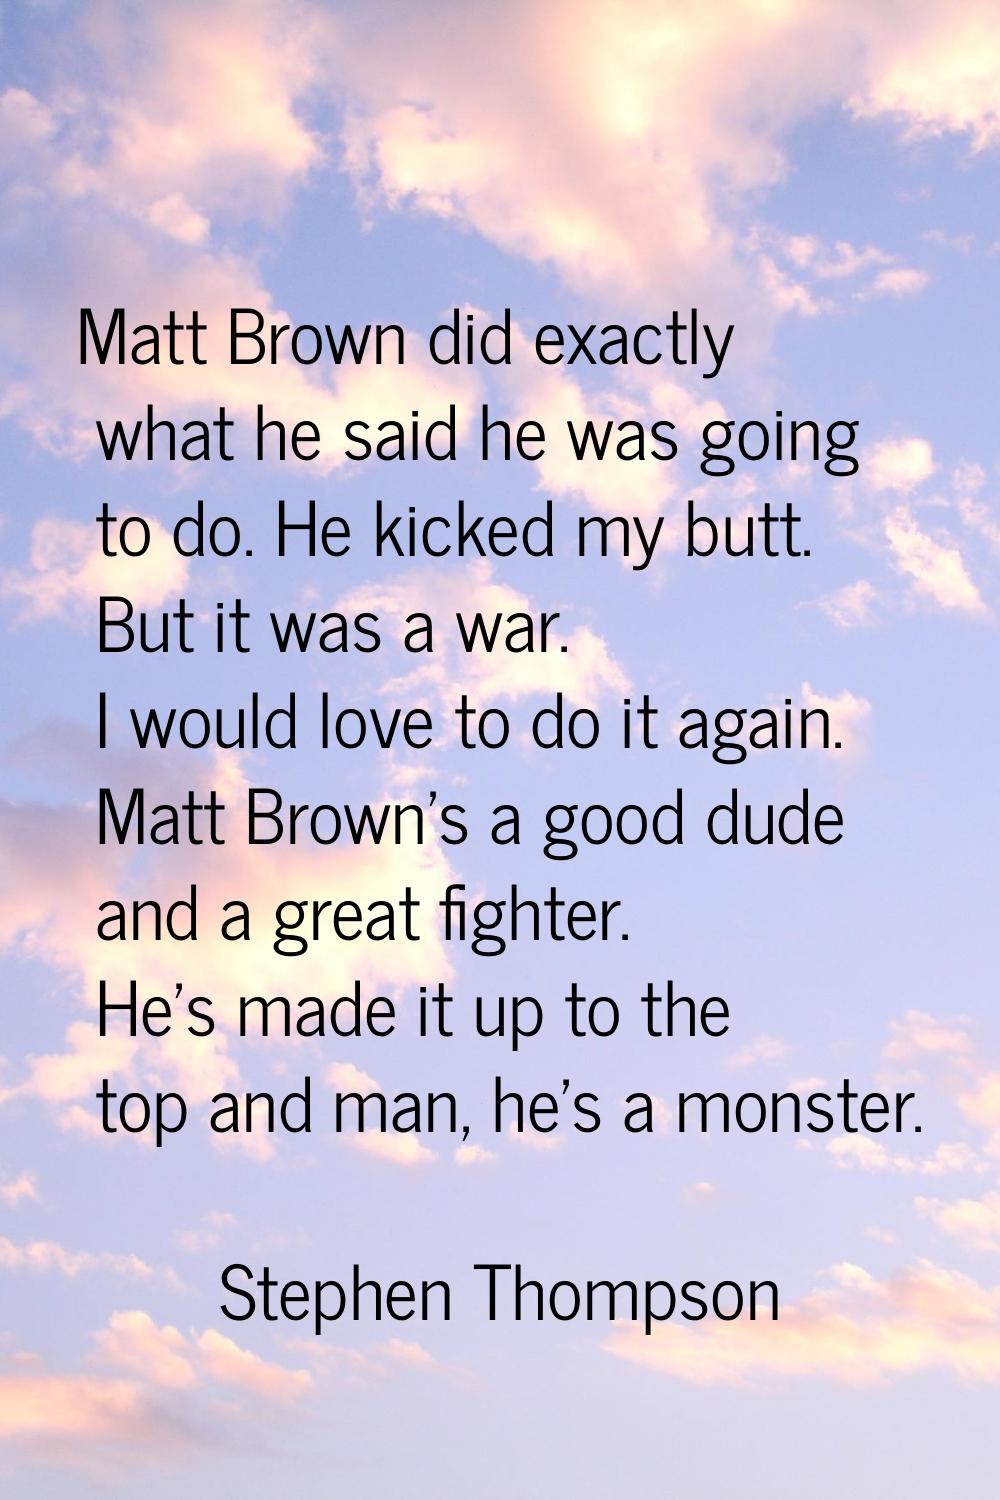 Matt Brown did exactly what he said he was going to do. He kicked my butt. But it was a war. I woul